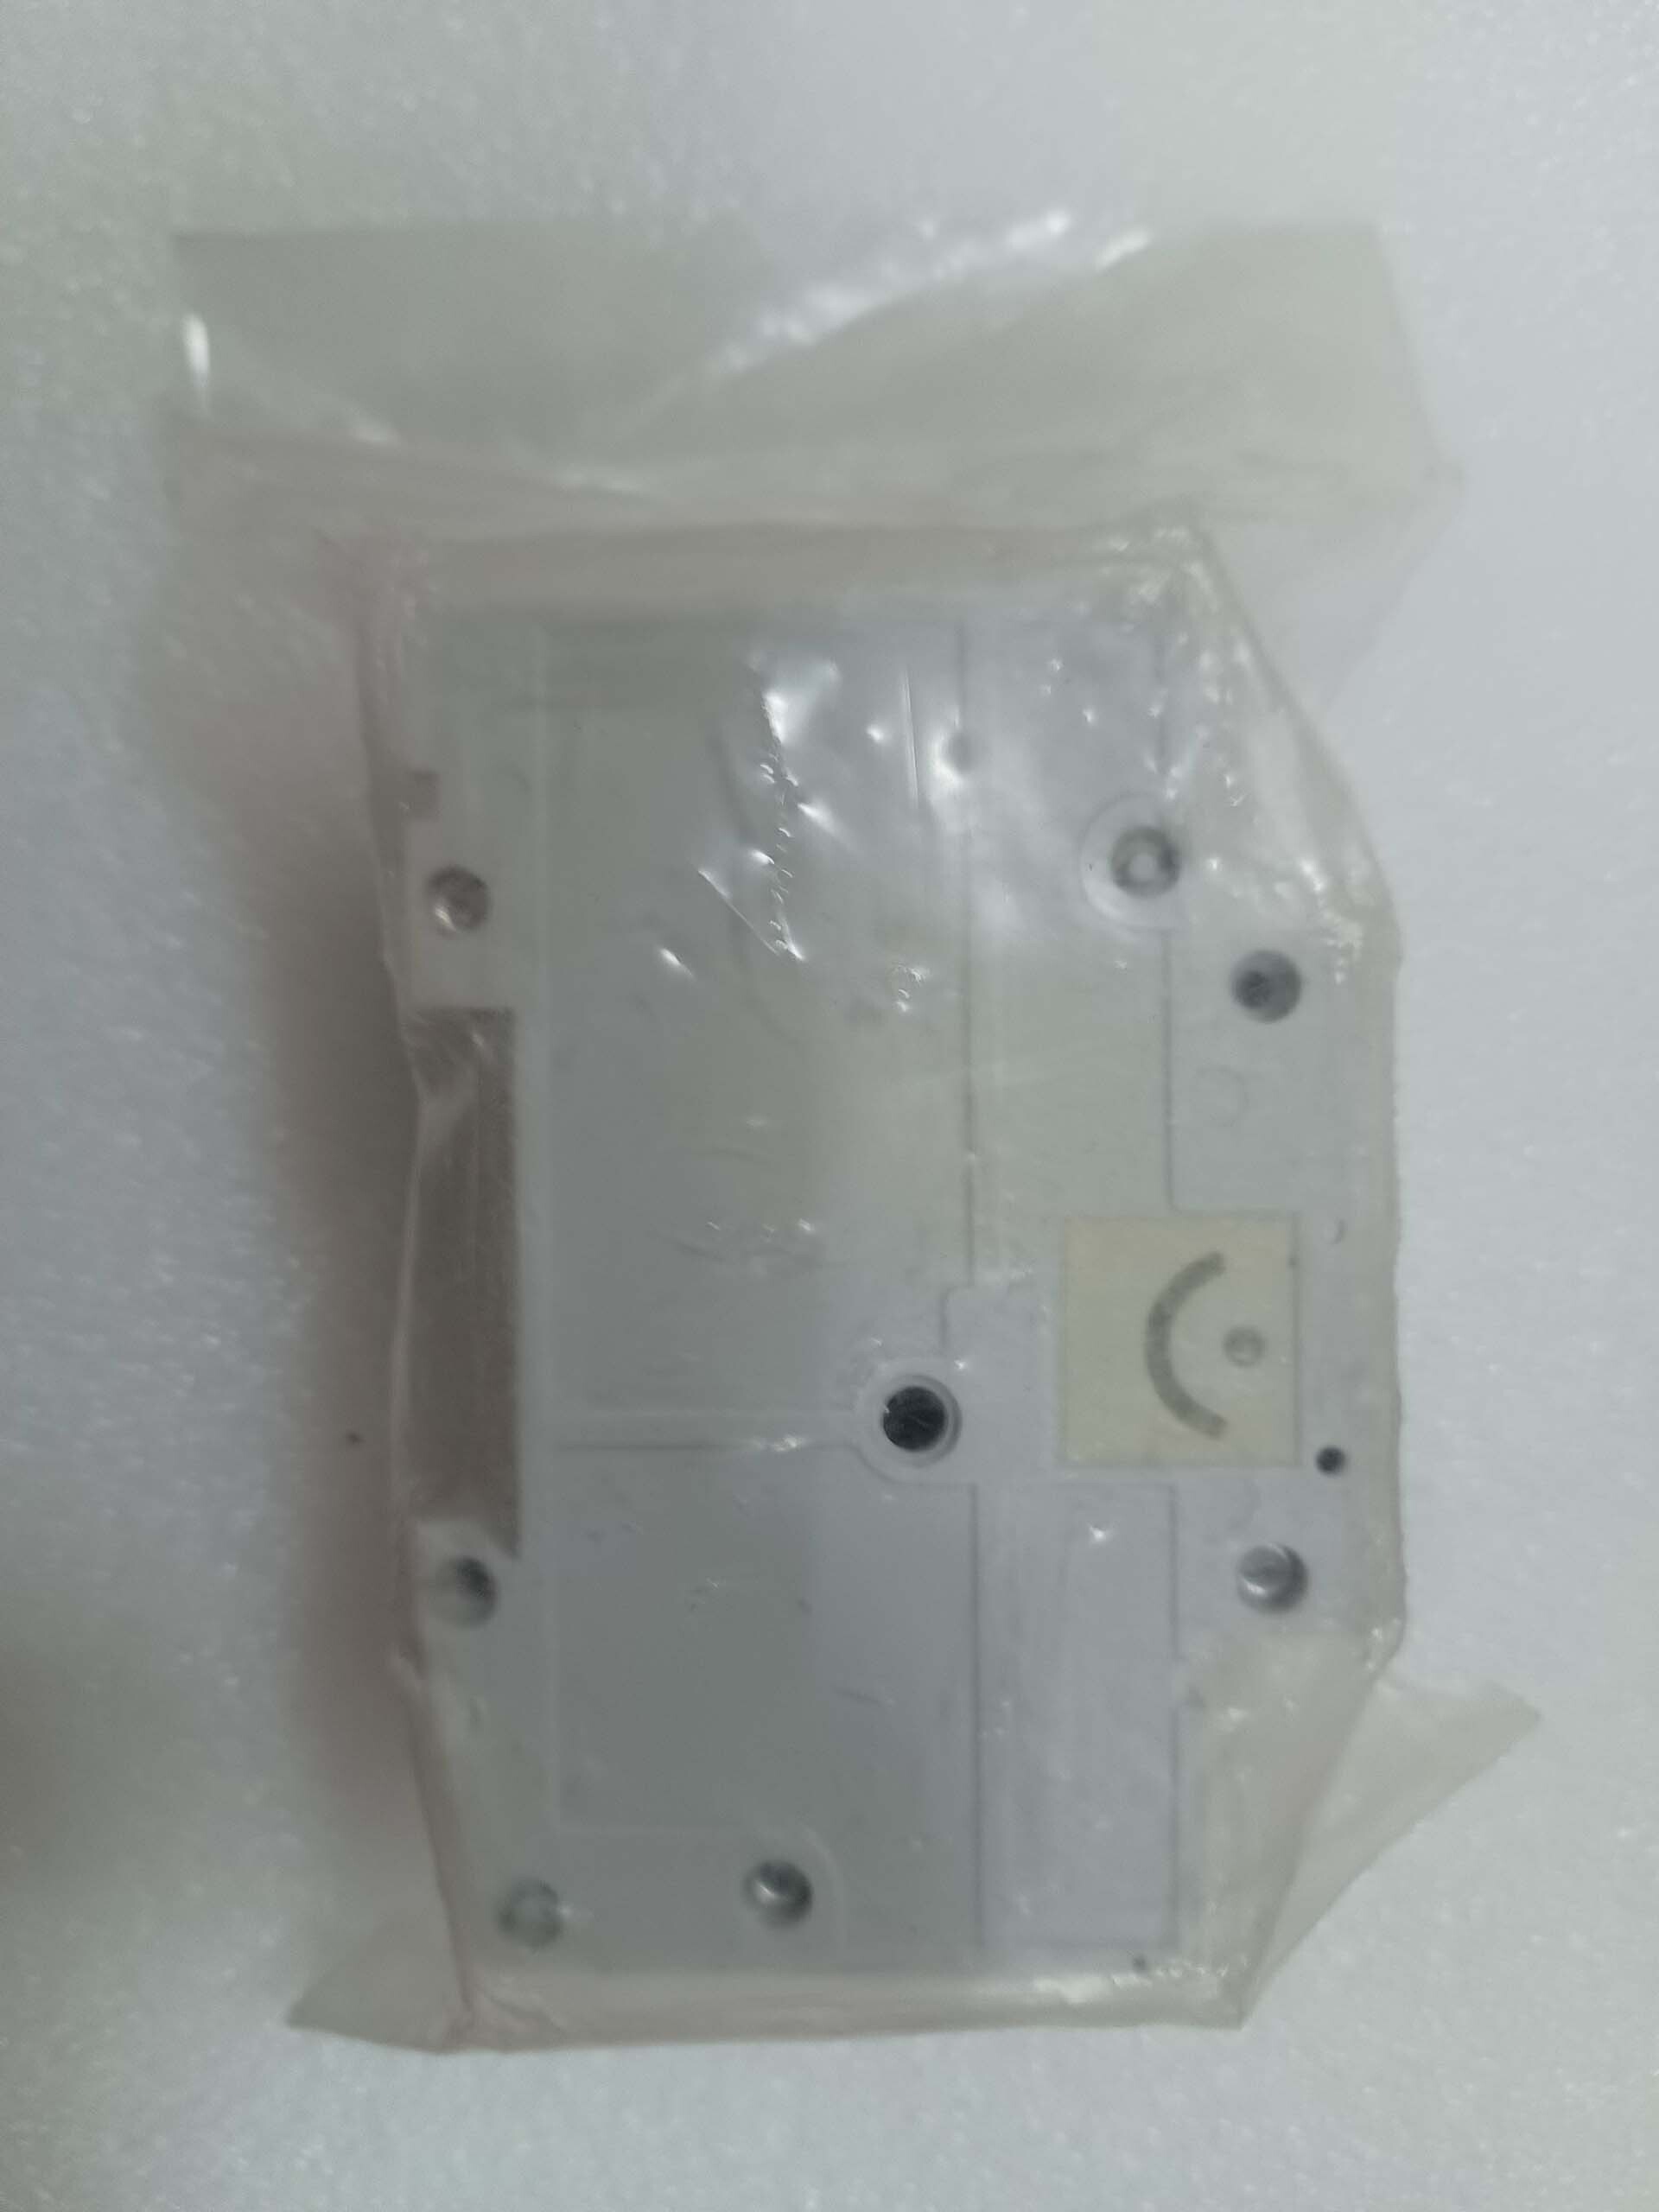 Photo Used LPE Spare parts for 2061S For Sale